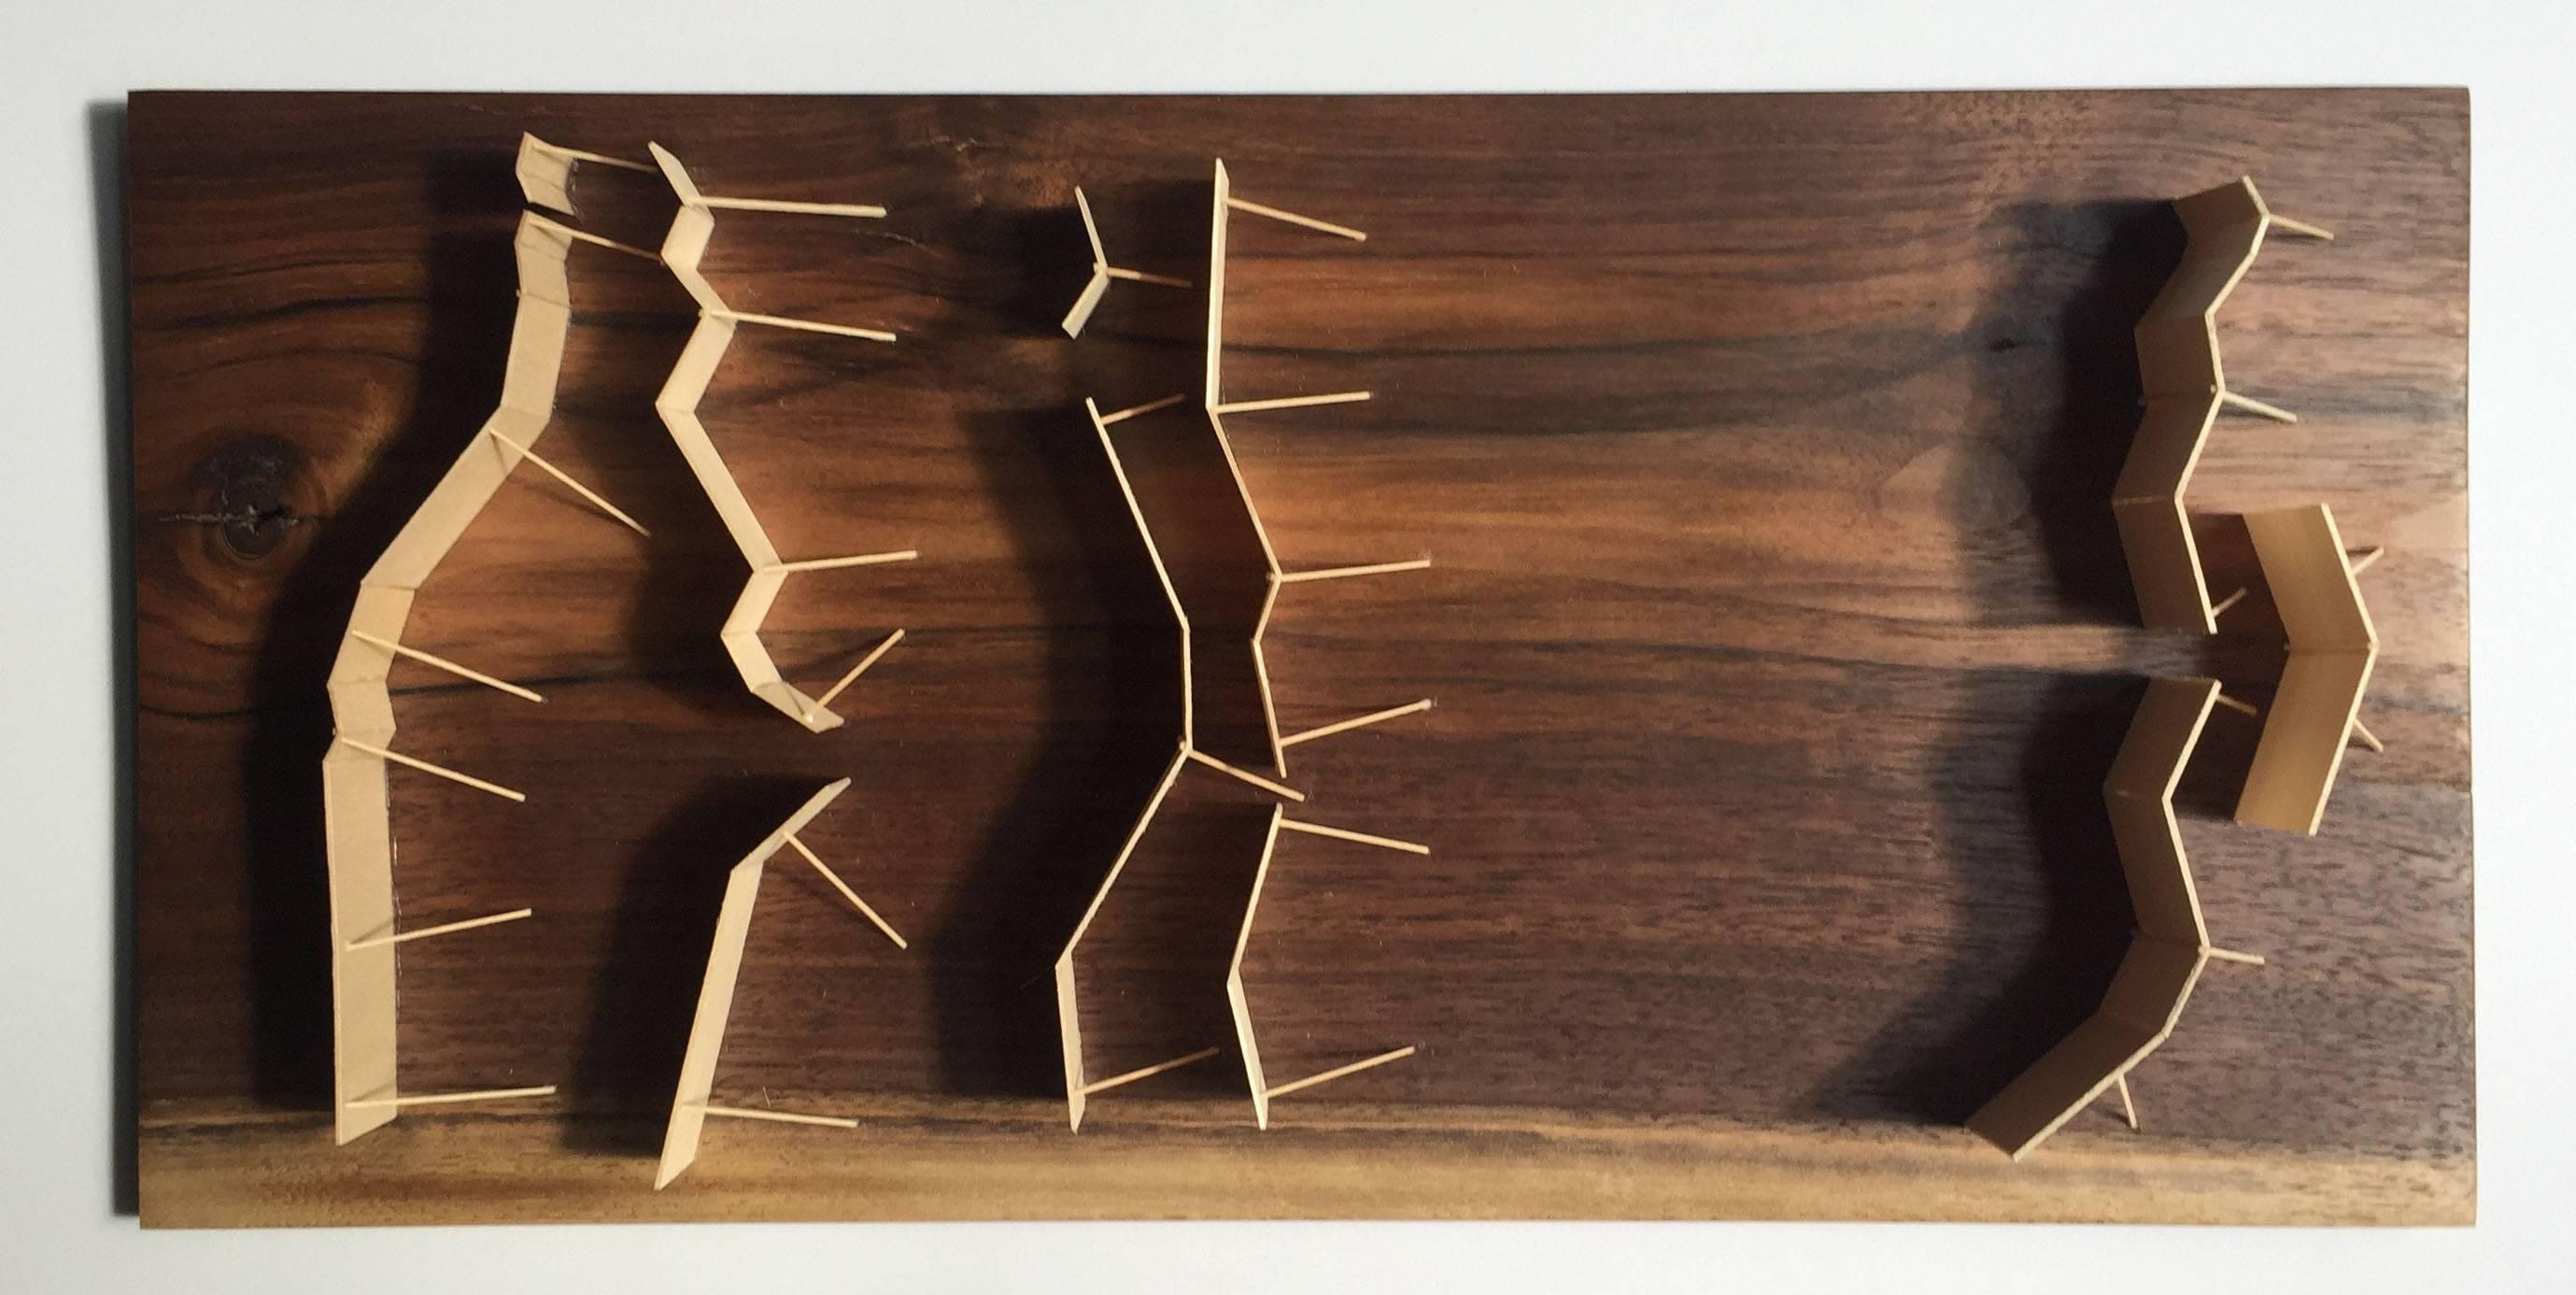 Fritz Horstman, Five Walls With Openings, 2016, Wood, Walnut